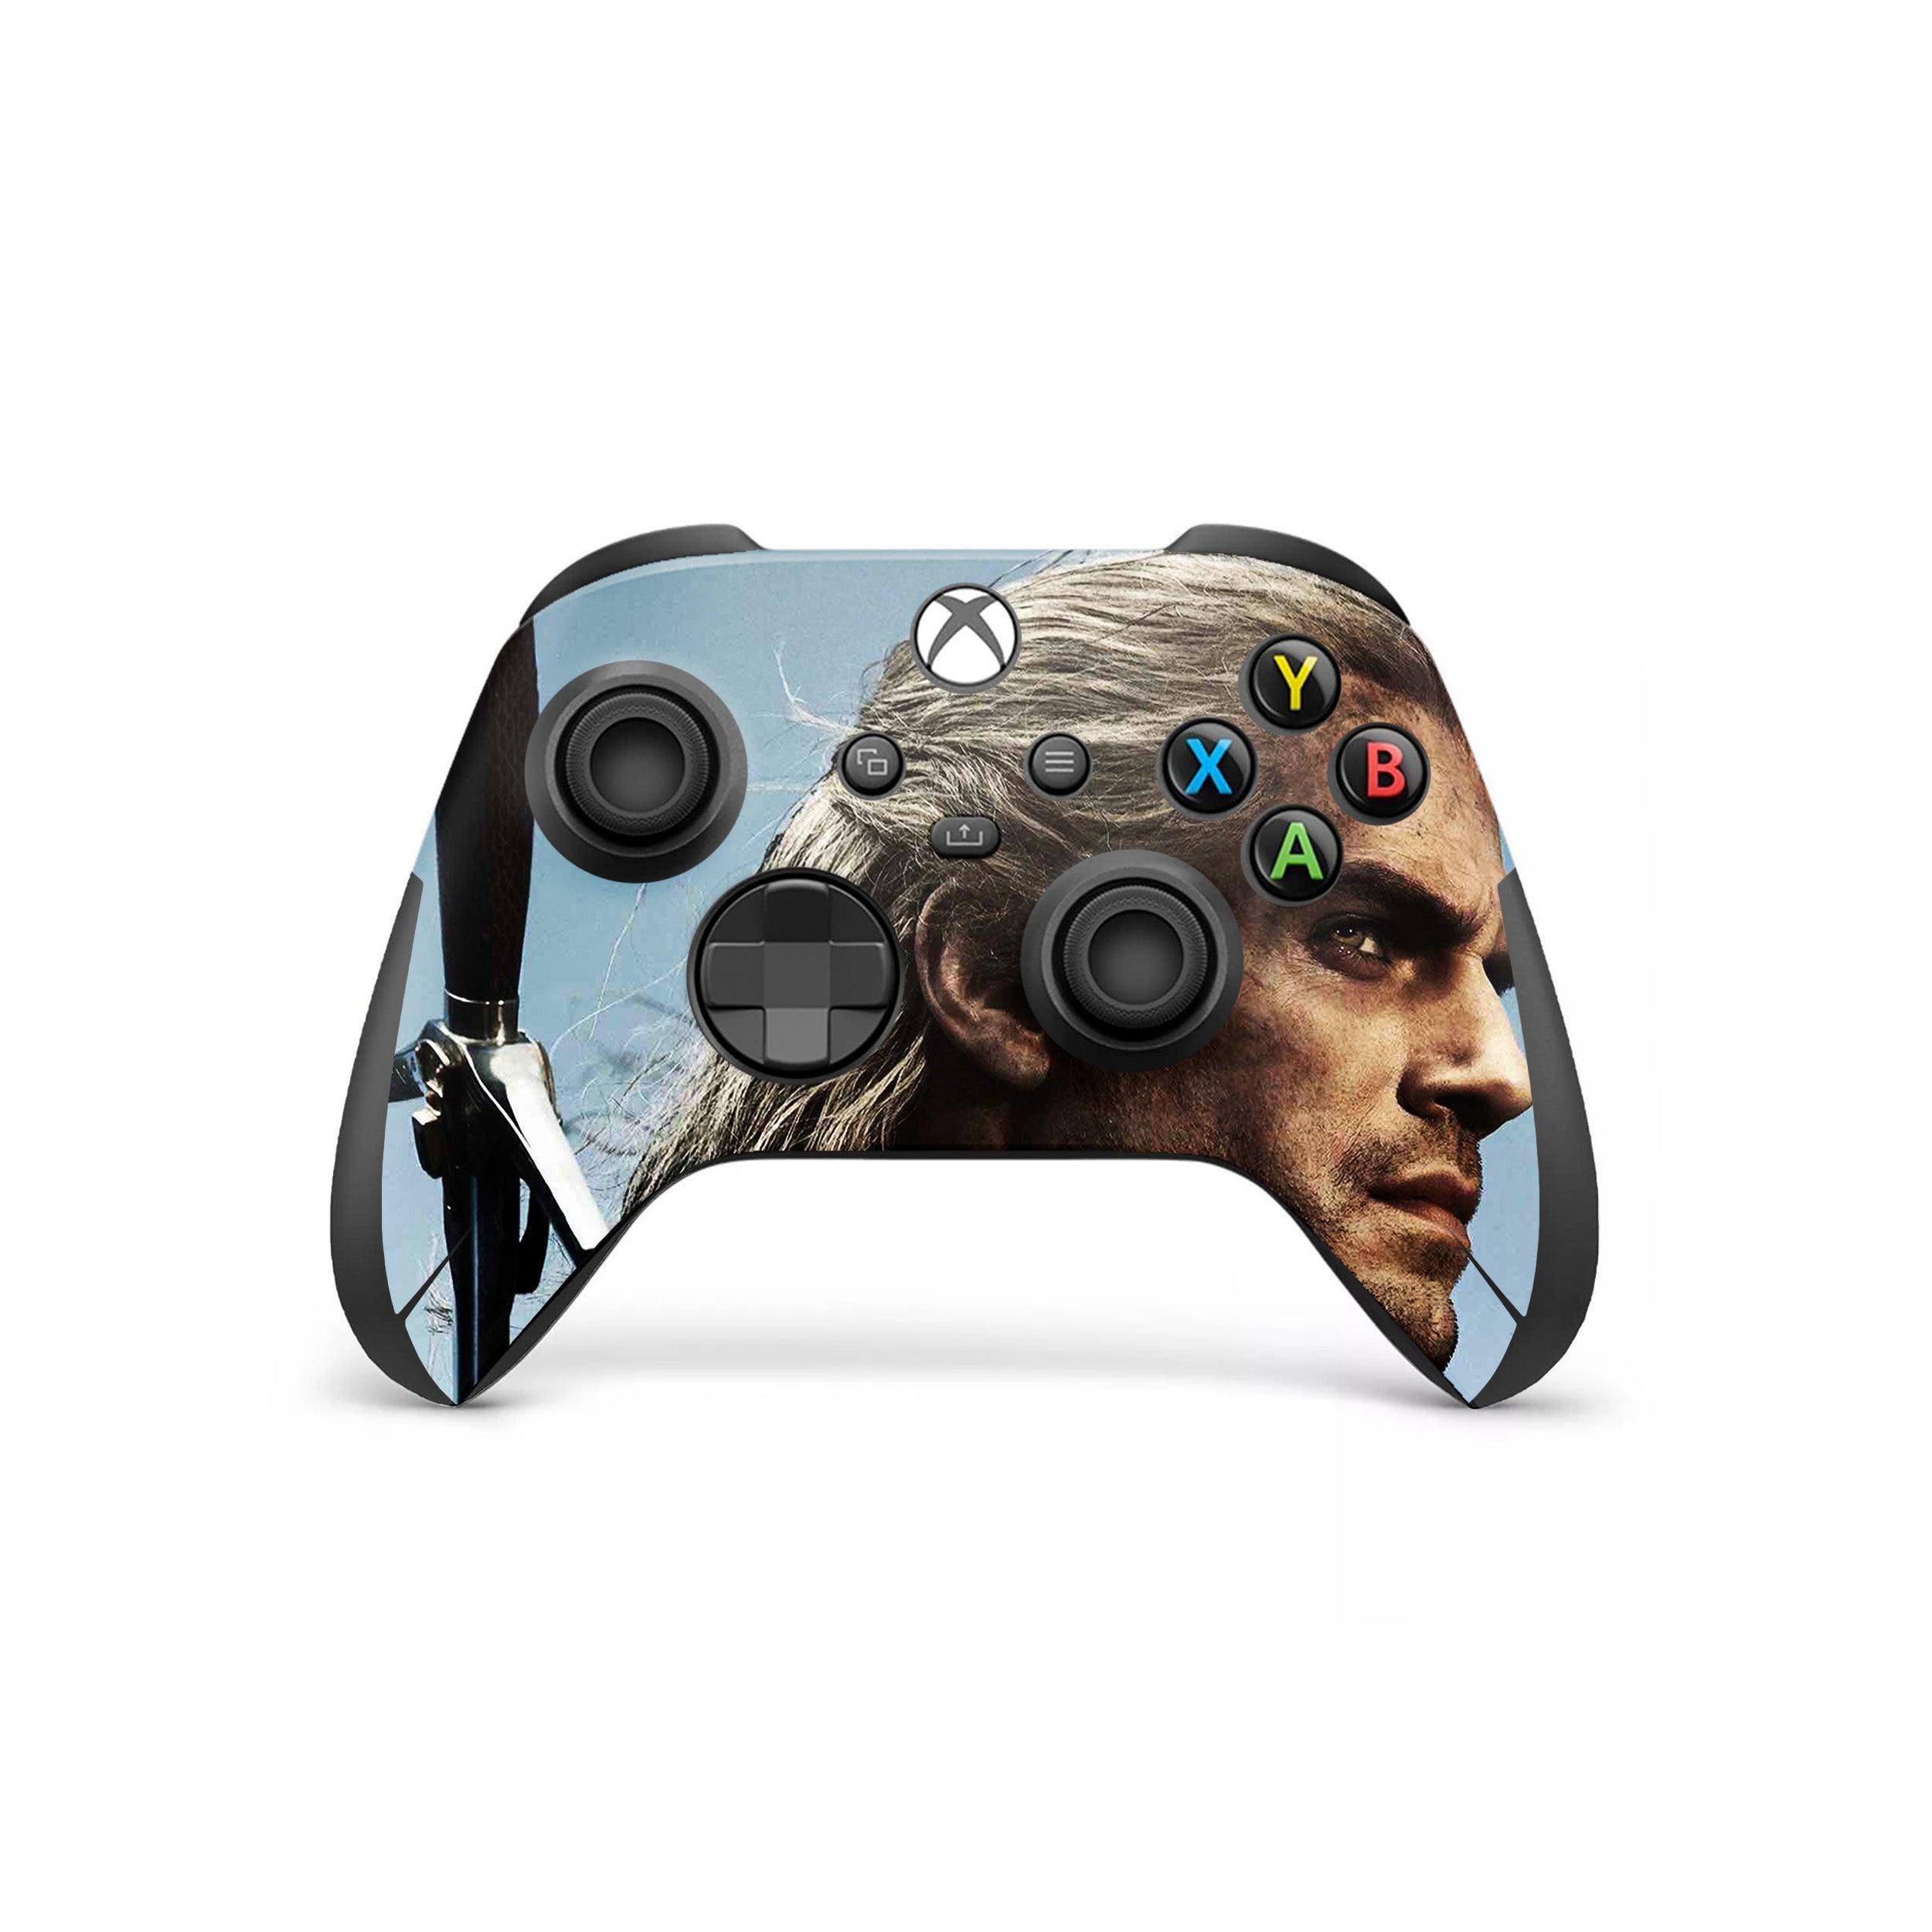 A video game skin featuring a The Witcher design for the Xbox Wireless Controller.